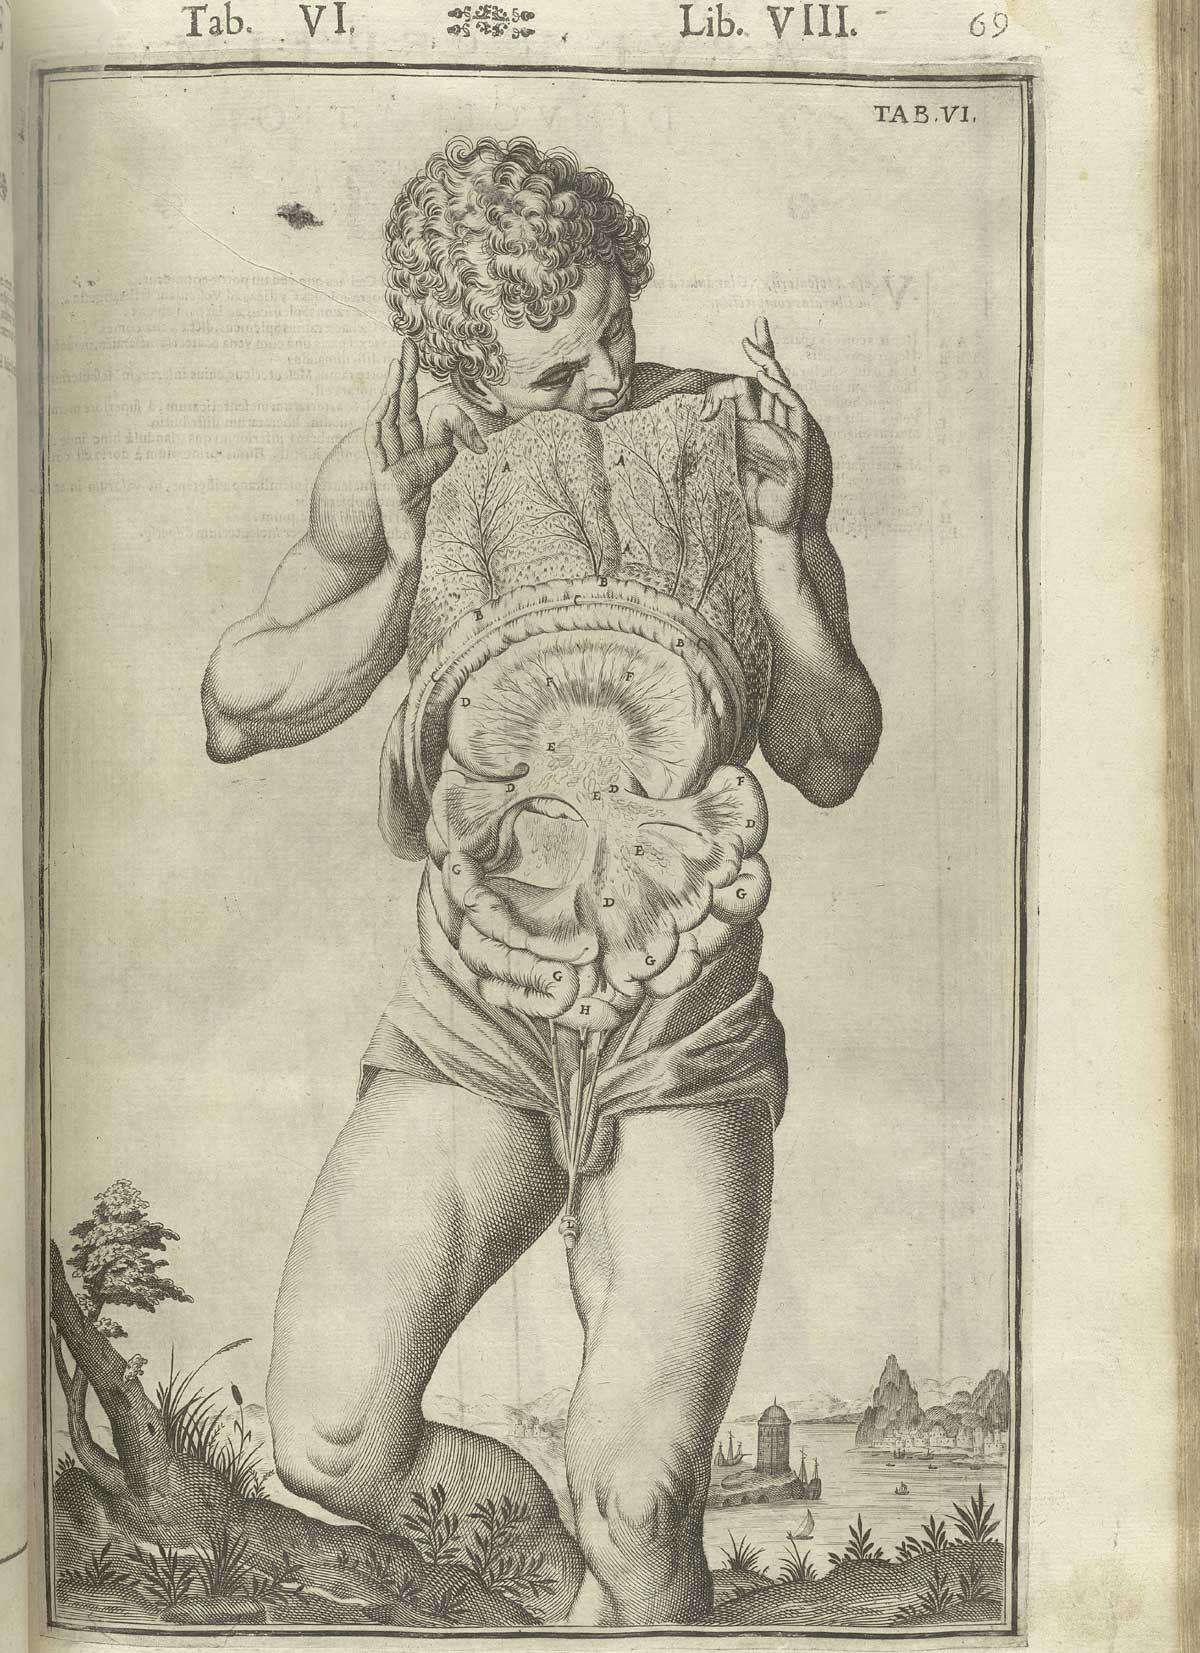 Engraving showing a facing view of a standing nude male anatomical figure in a pastoral setting holding up the skin of his opened abdomen showing the peritoneum and intestines exposed in detail; from Adriaan van de Spiegel and Giulio Cassieri’s De humani corporis fabrica libri decem, Venice, 1627, NLM call no. WZ 250 S755dh 1627.